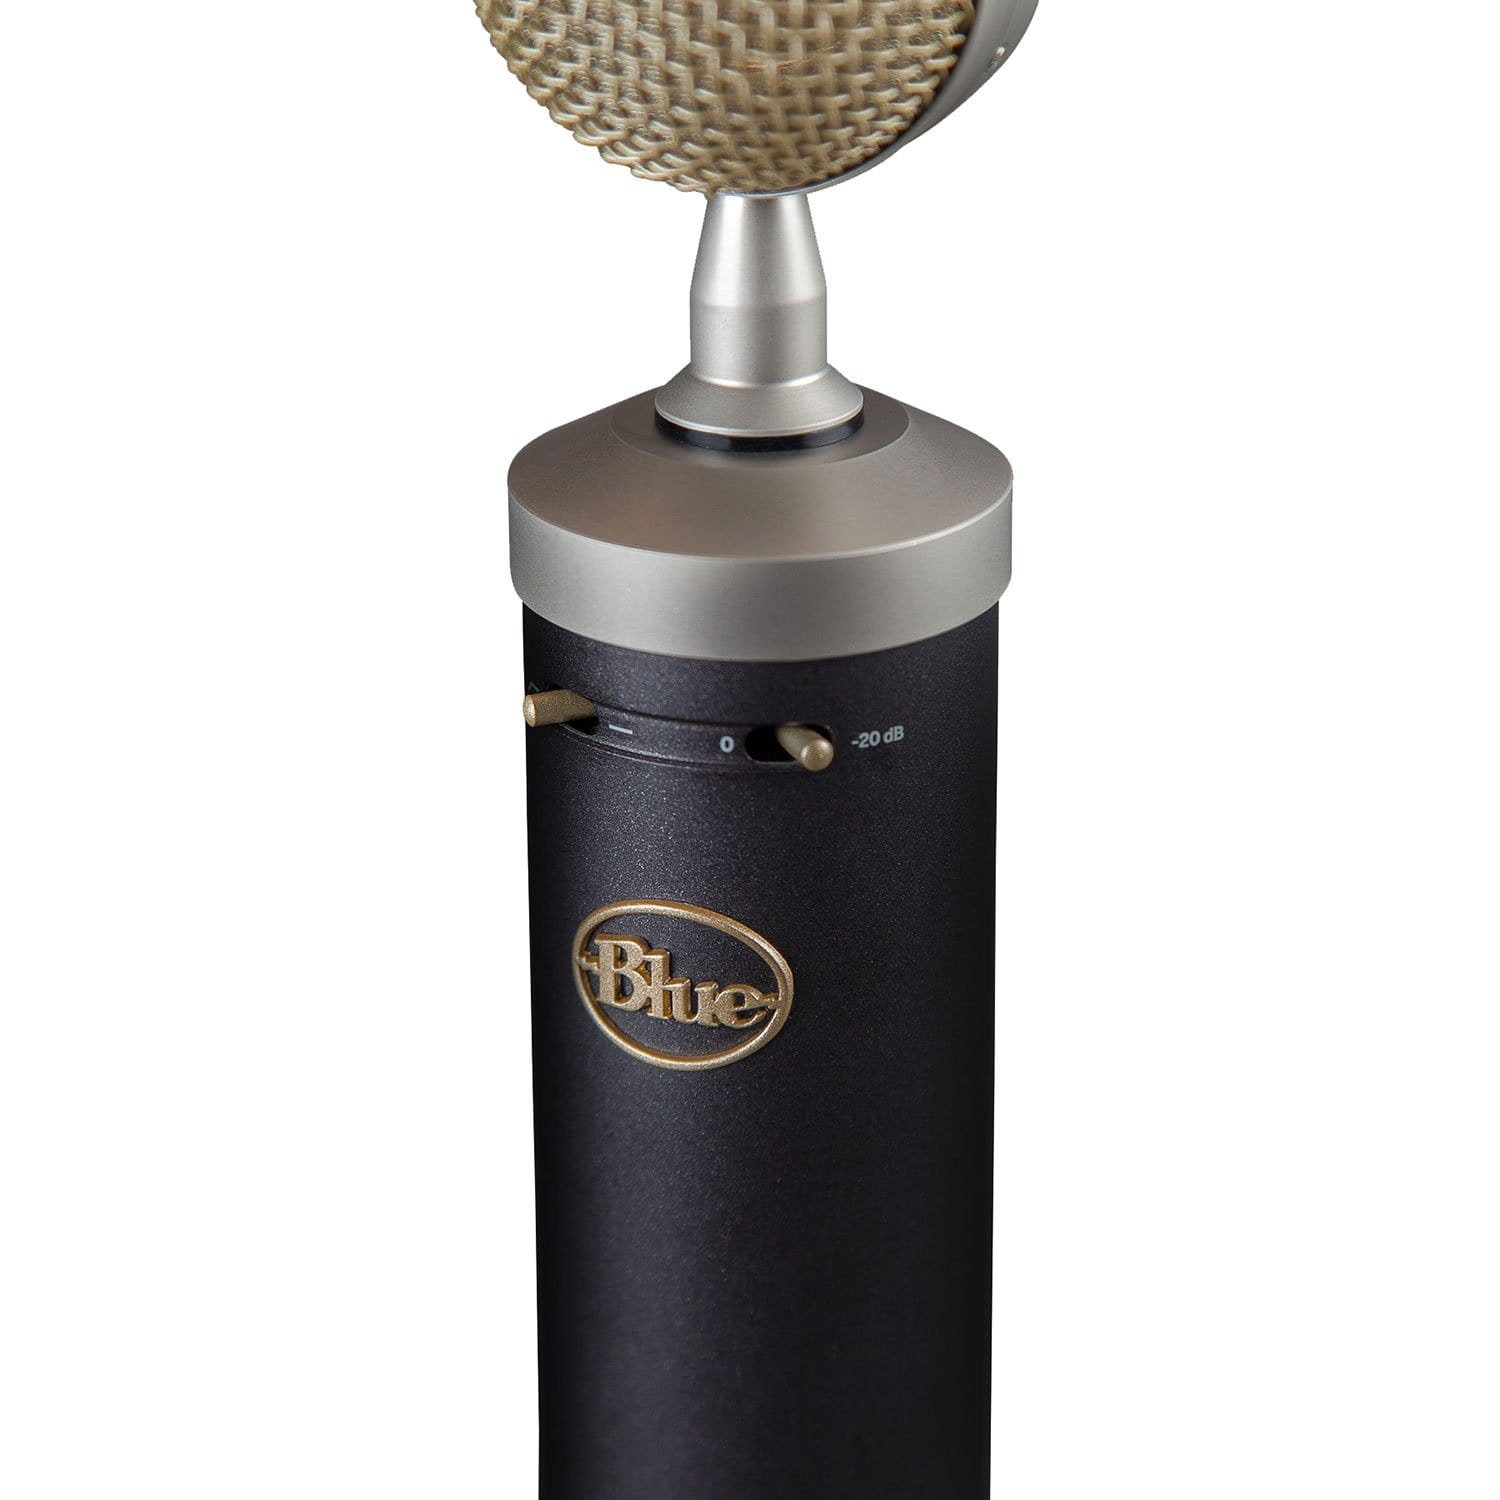 Blue Baby Bottle SL Large Condenser Microphone - ProSound and Stage Lighting